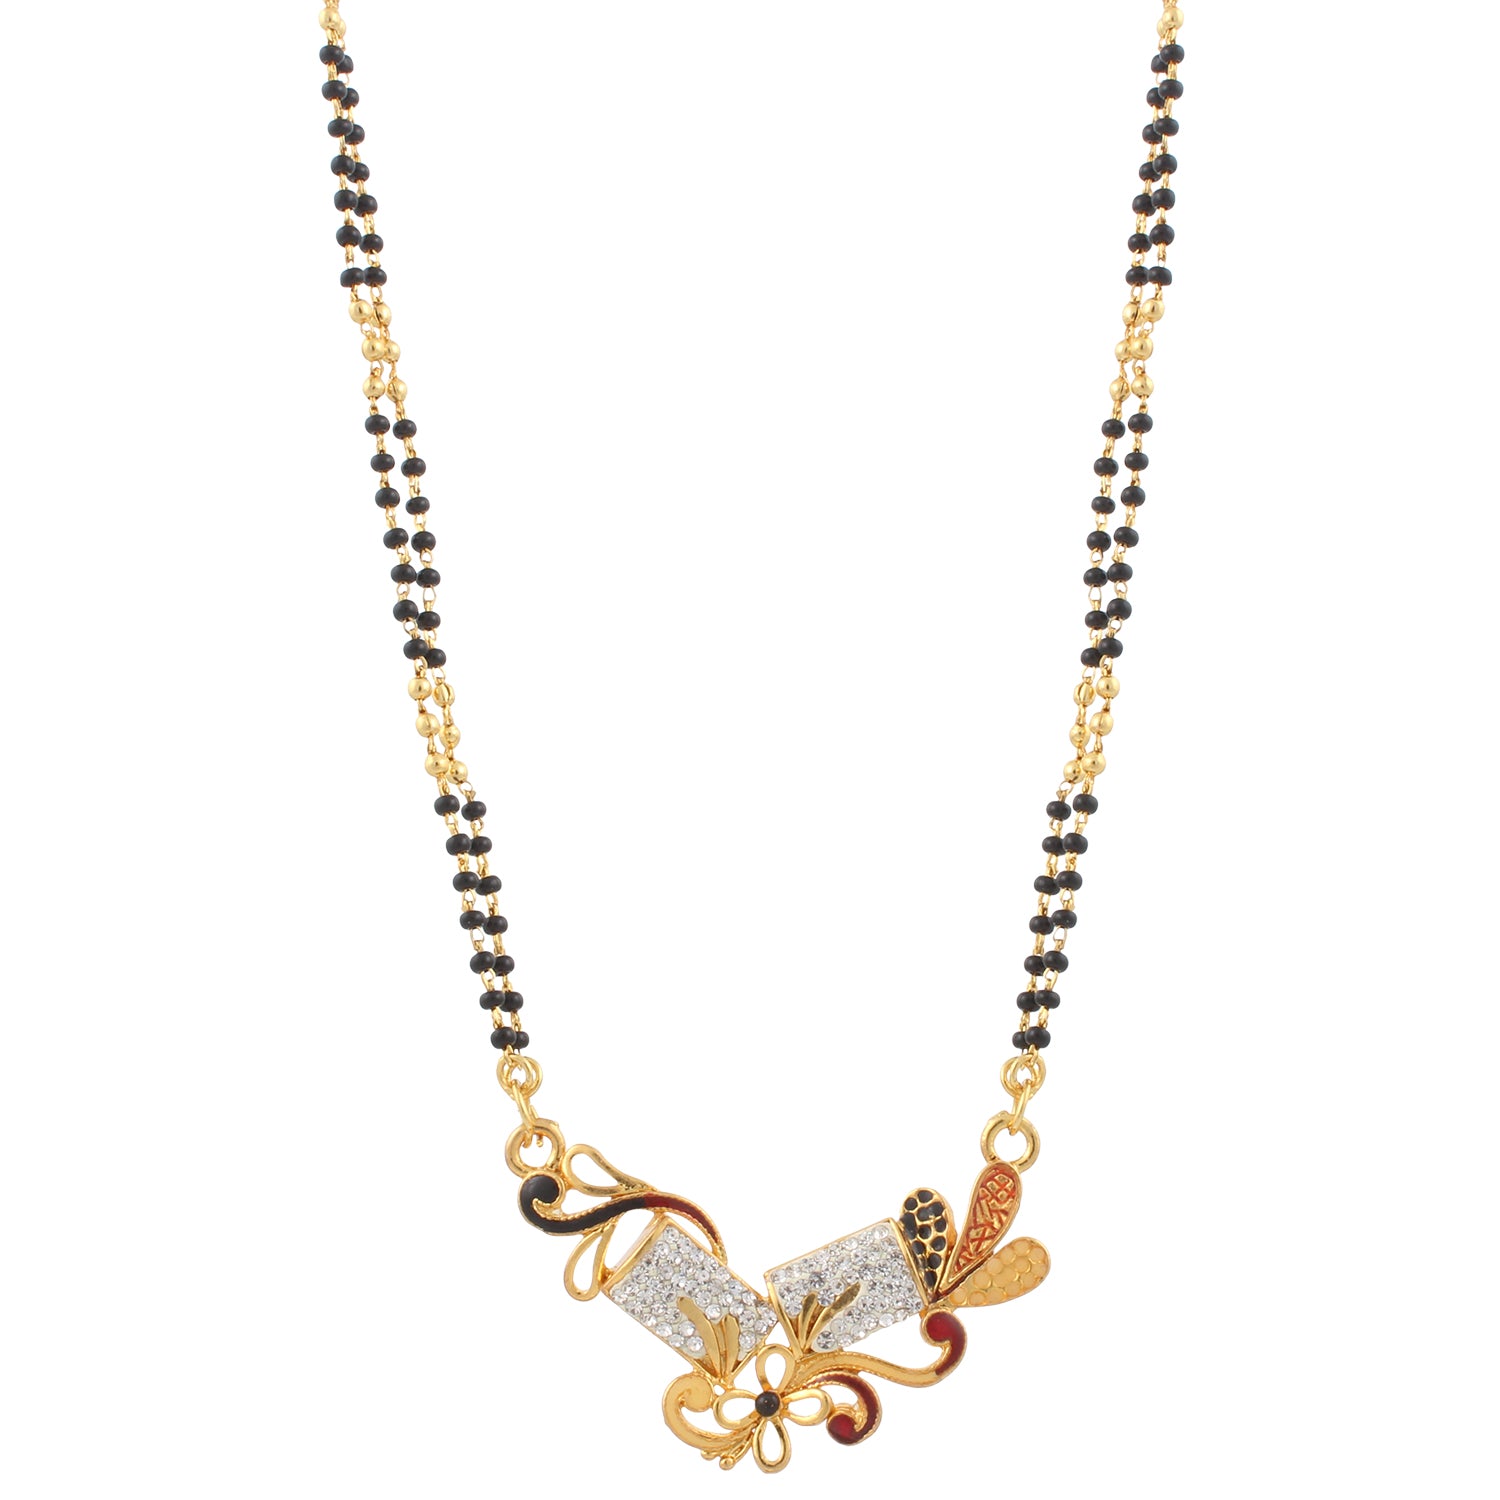 Floral Design Imitation Mangalsutra Jewellery with Gold Plating For Women